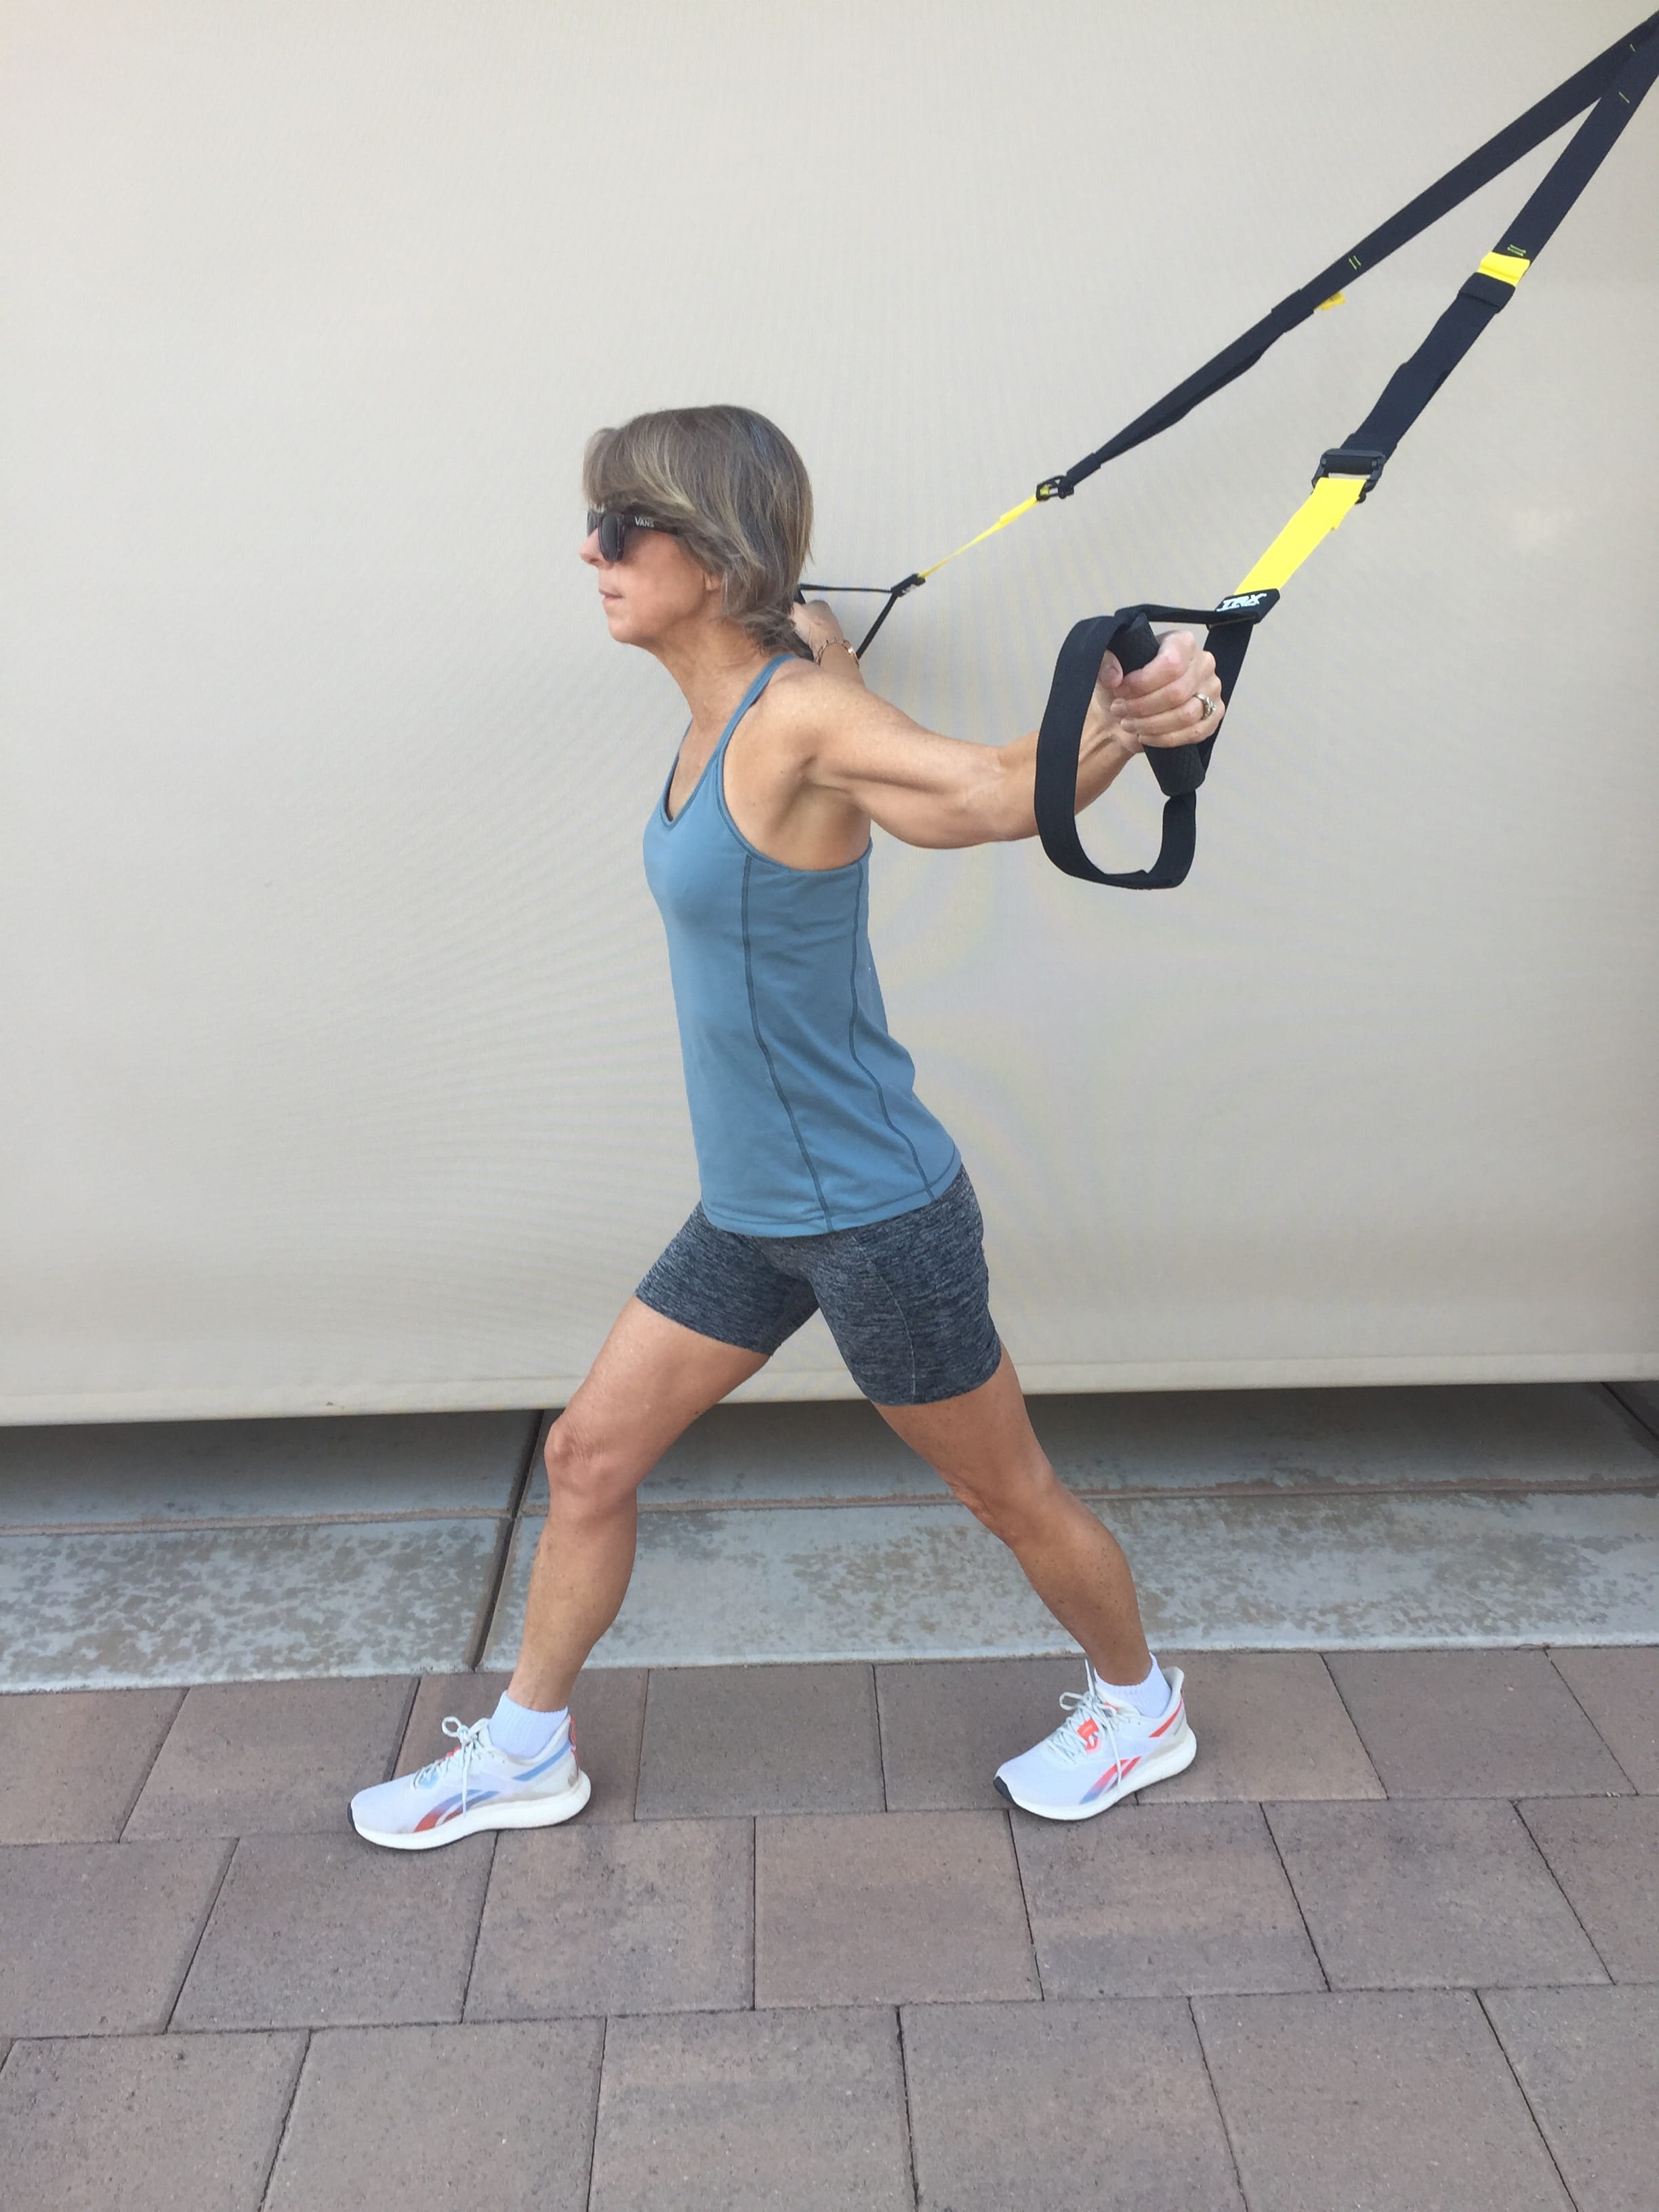 MASTER CLASS: Strength exercises done using TRX straps benefit